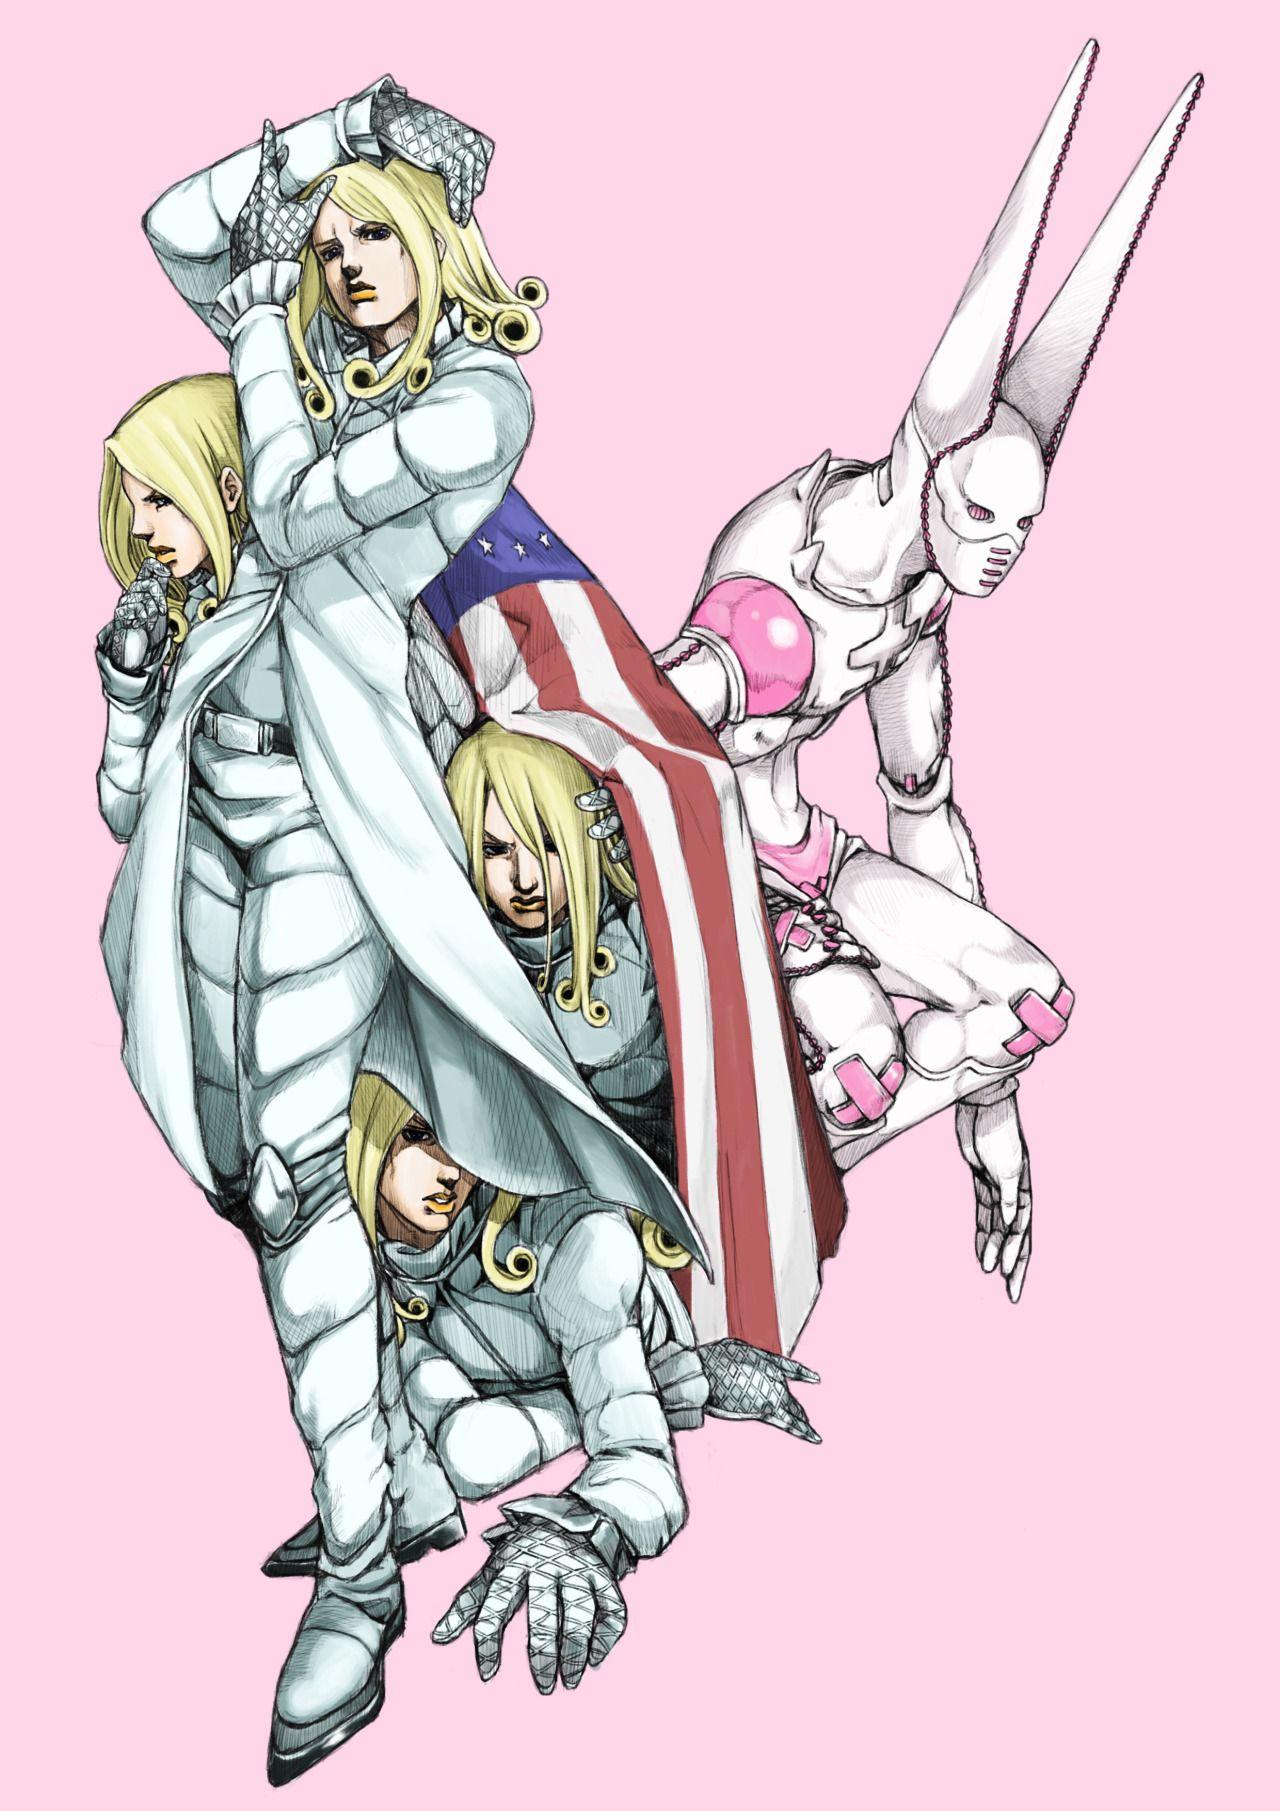 Funny Valentine, the Great President of the United States